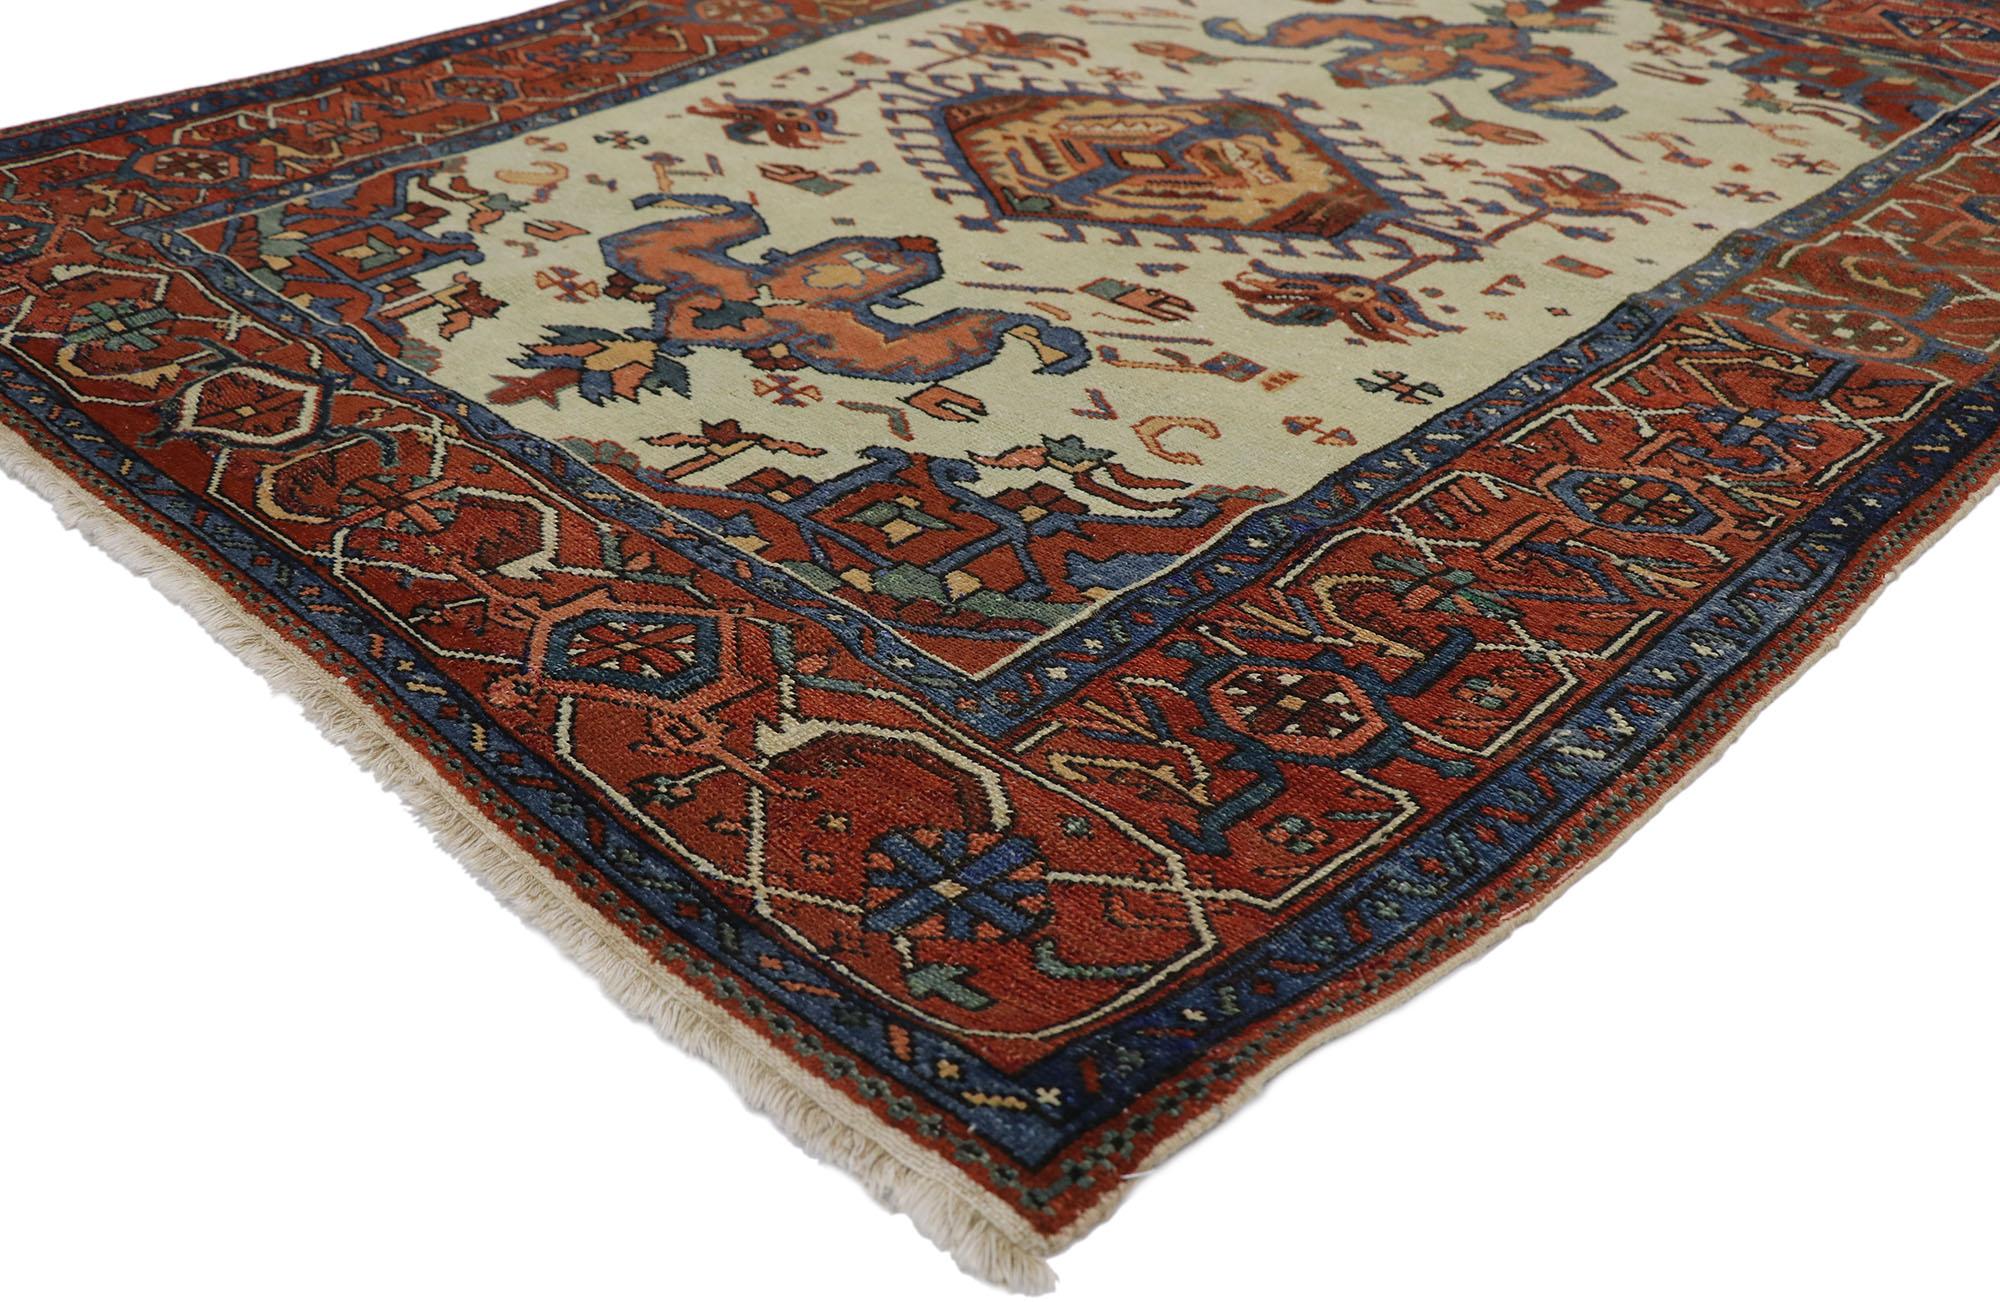 78118 Antique Persian Serapi rug with Modern Tribal style. Measures 04'07 x 05'09. Cleverly composed and poised to impress with its rustic sensibility, this hand knotted wool antique Persian Serapi rug will take on a curated lived-in look that feels